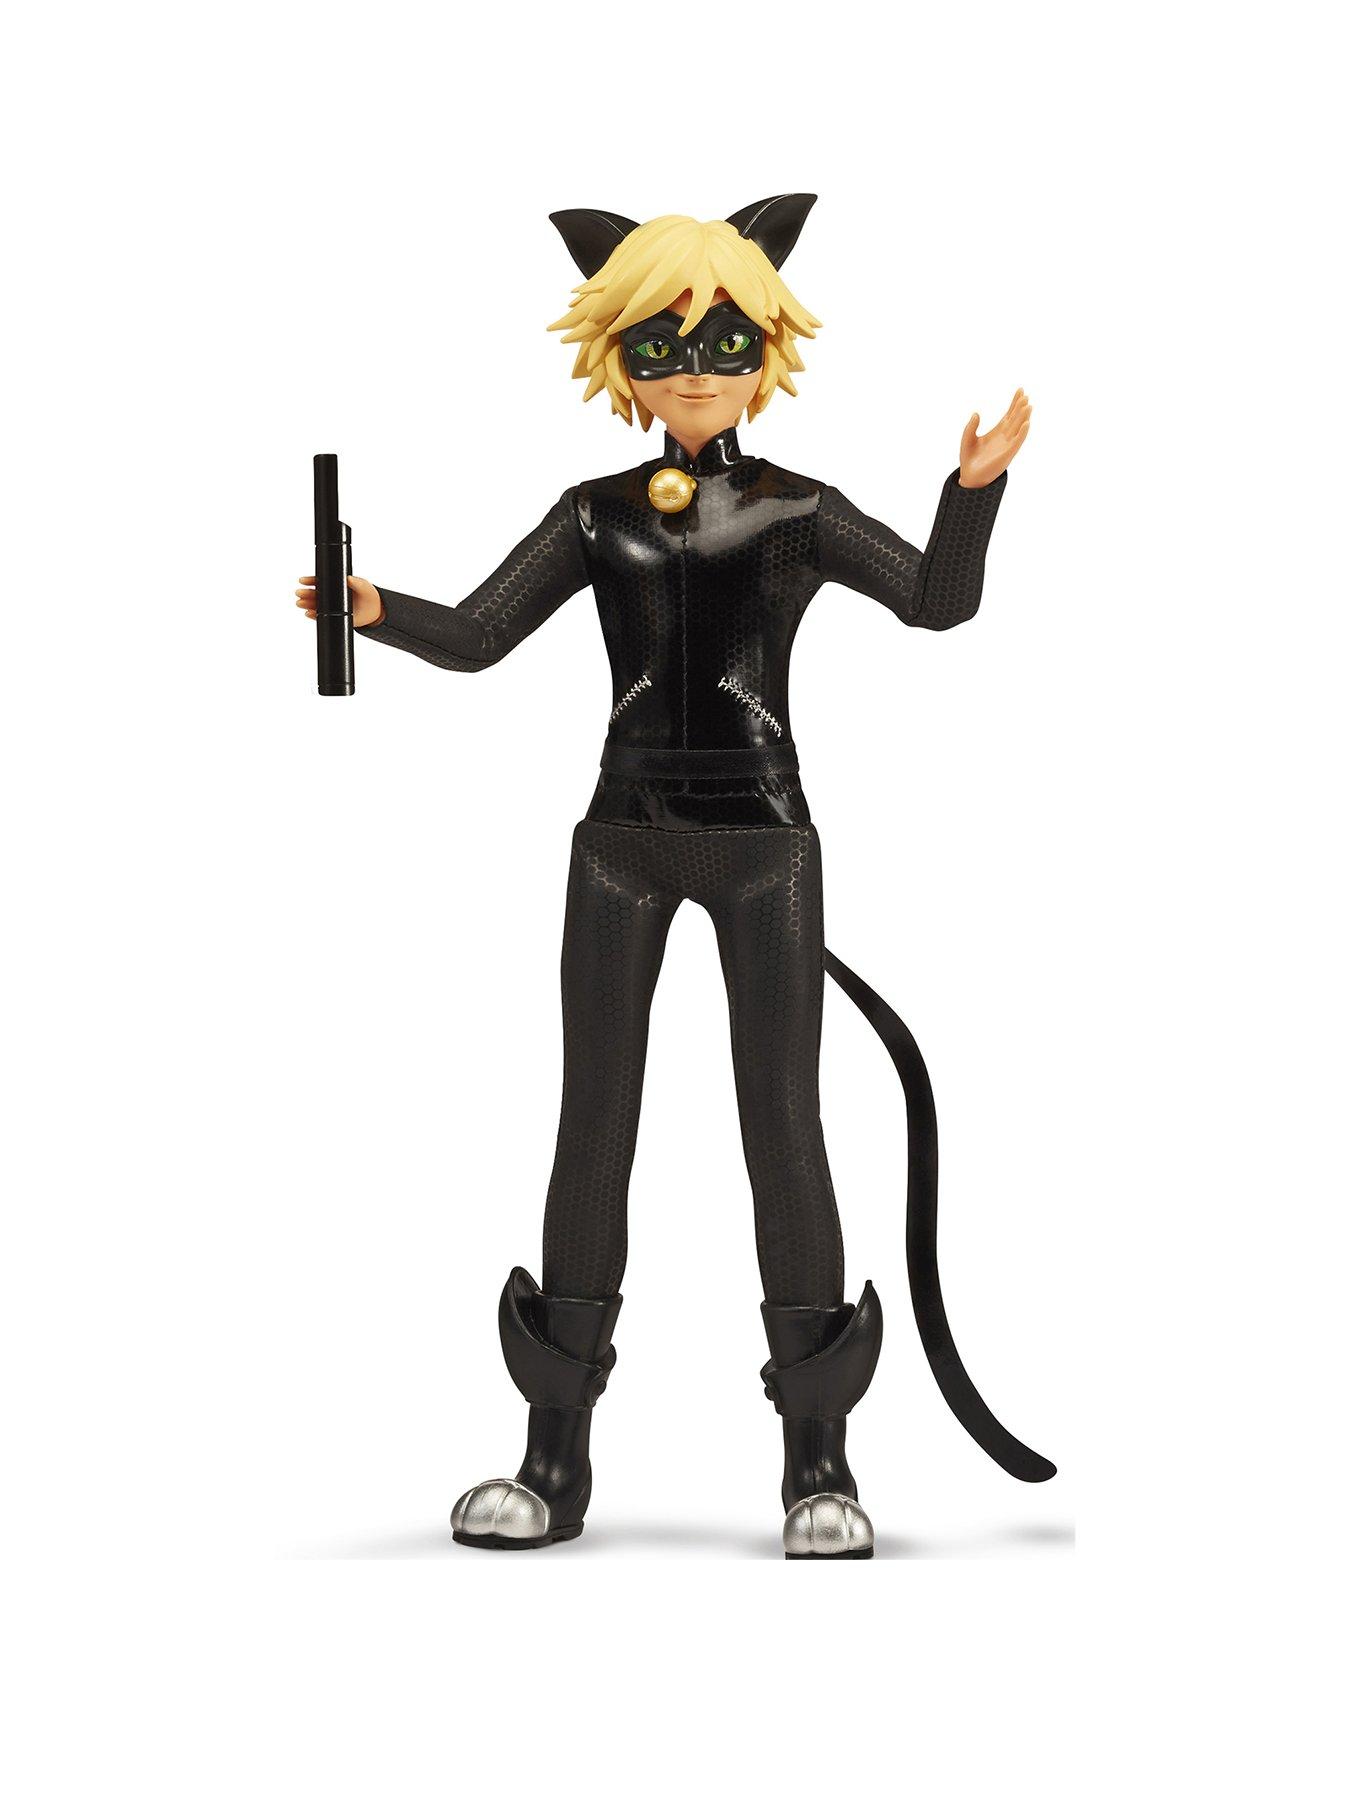 Cat Noir - How To Make A Cat Noir Costume - Cheap and Easy